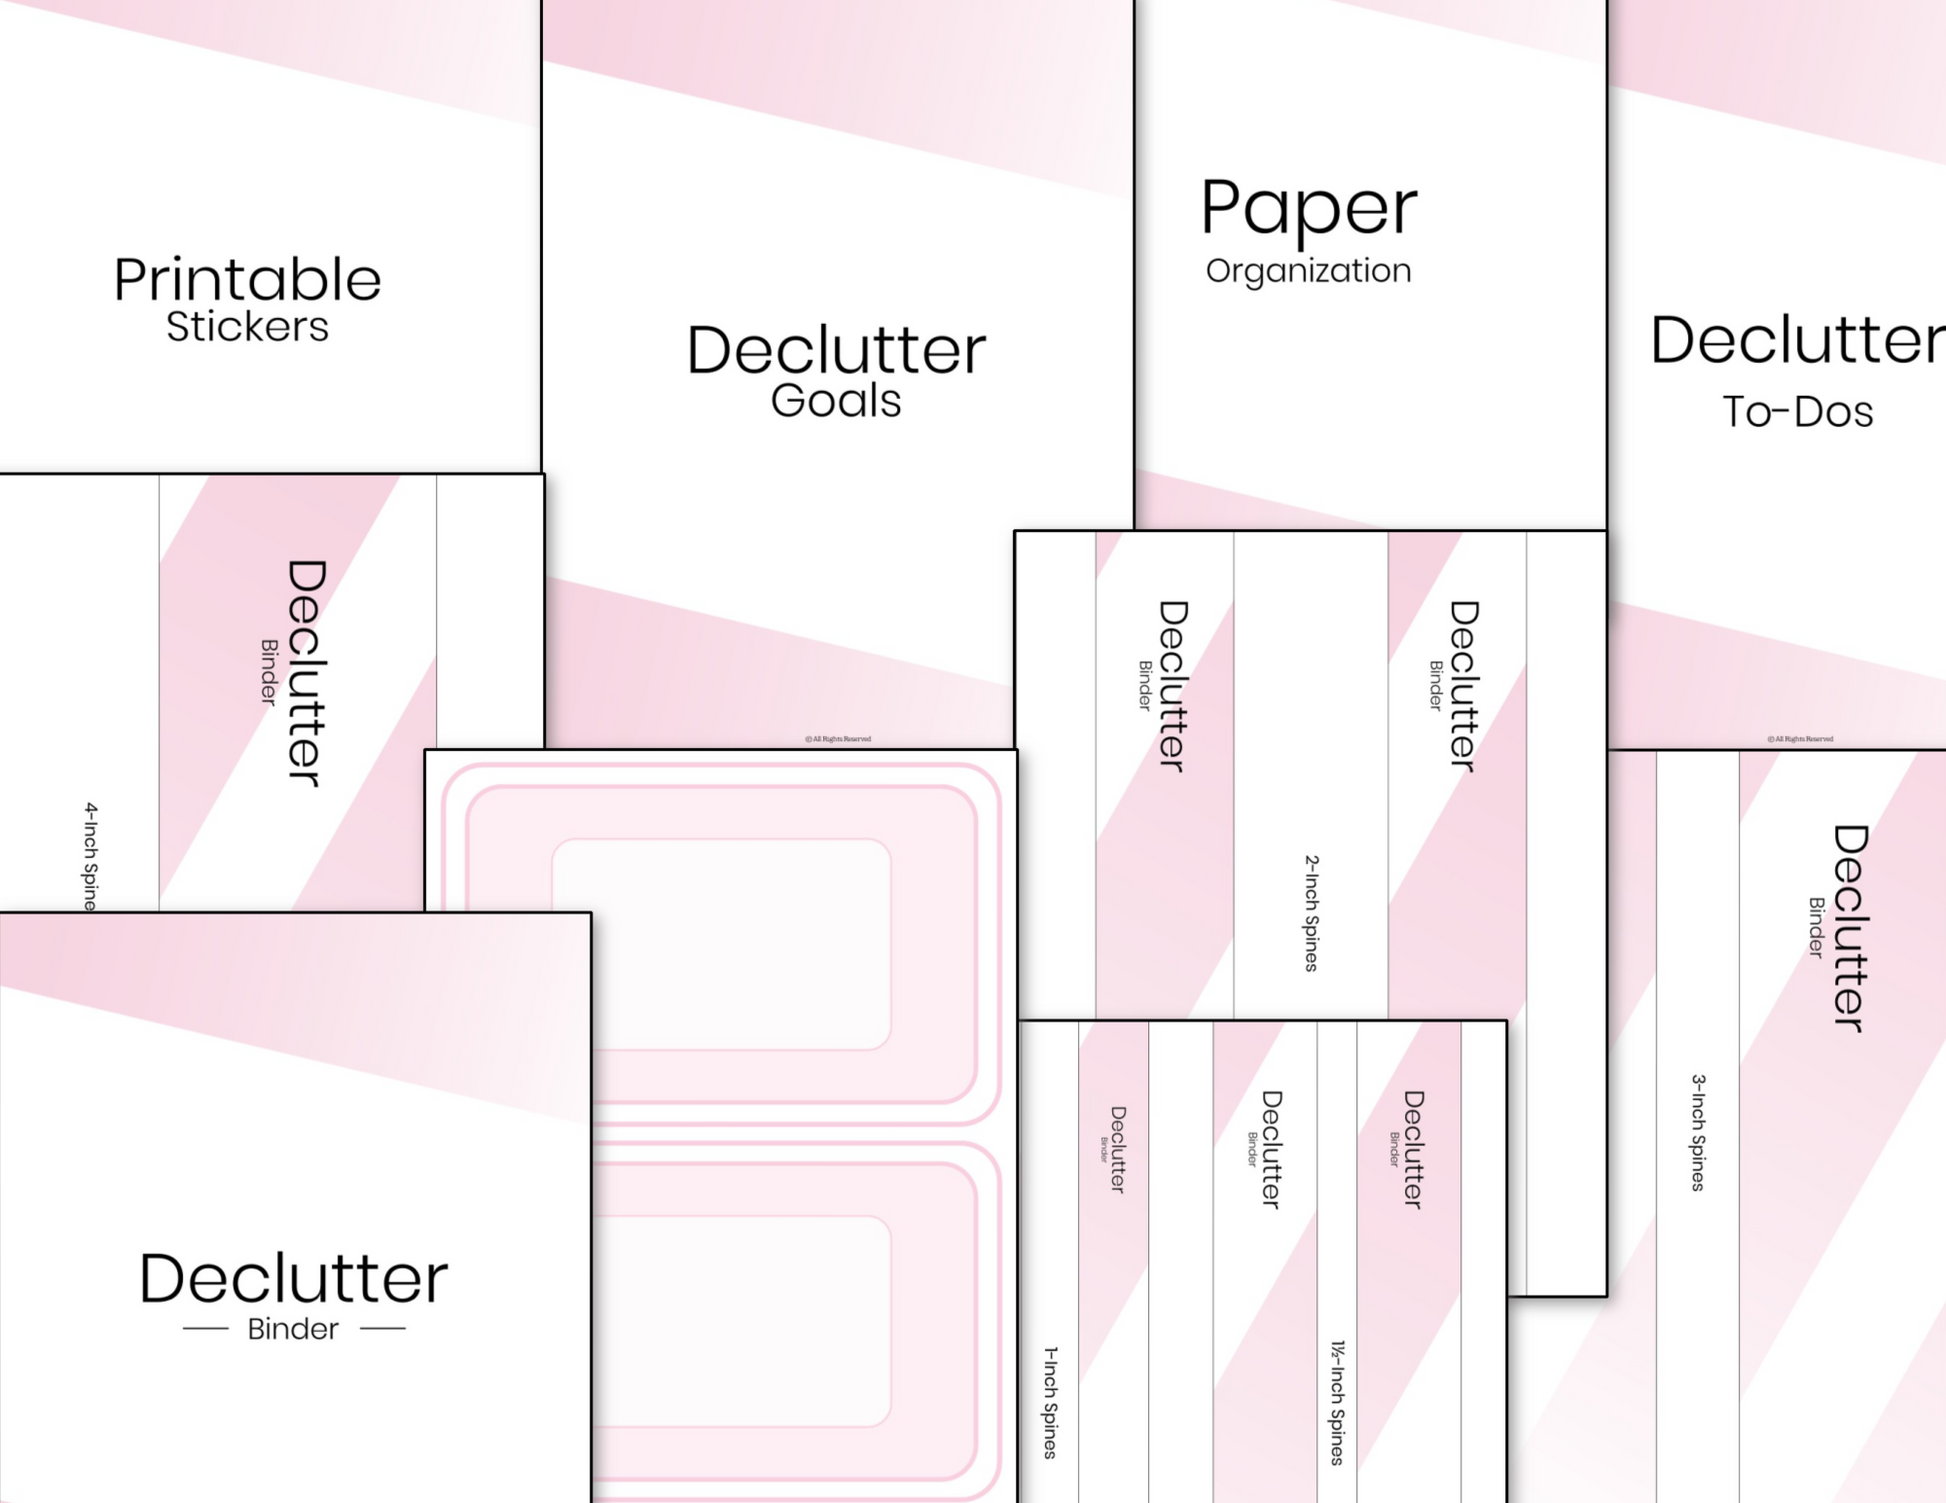 A collection of pink and white home organization printable labels and Organized 31 Shop's Declutter Binder Fillable - Pink templates, including stickers and binder covers.